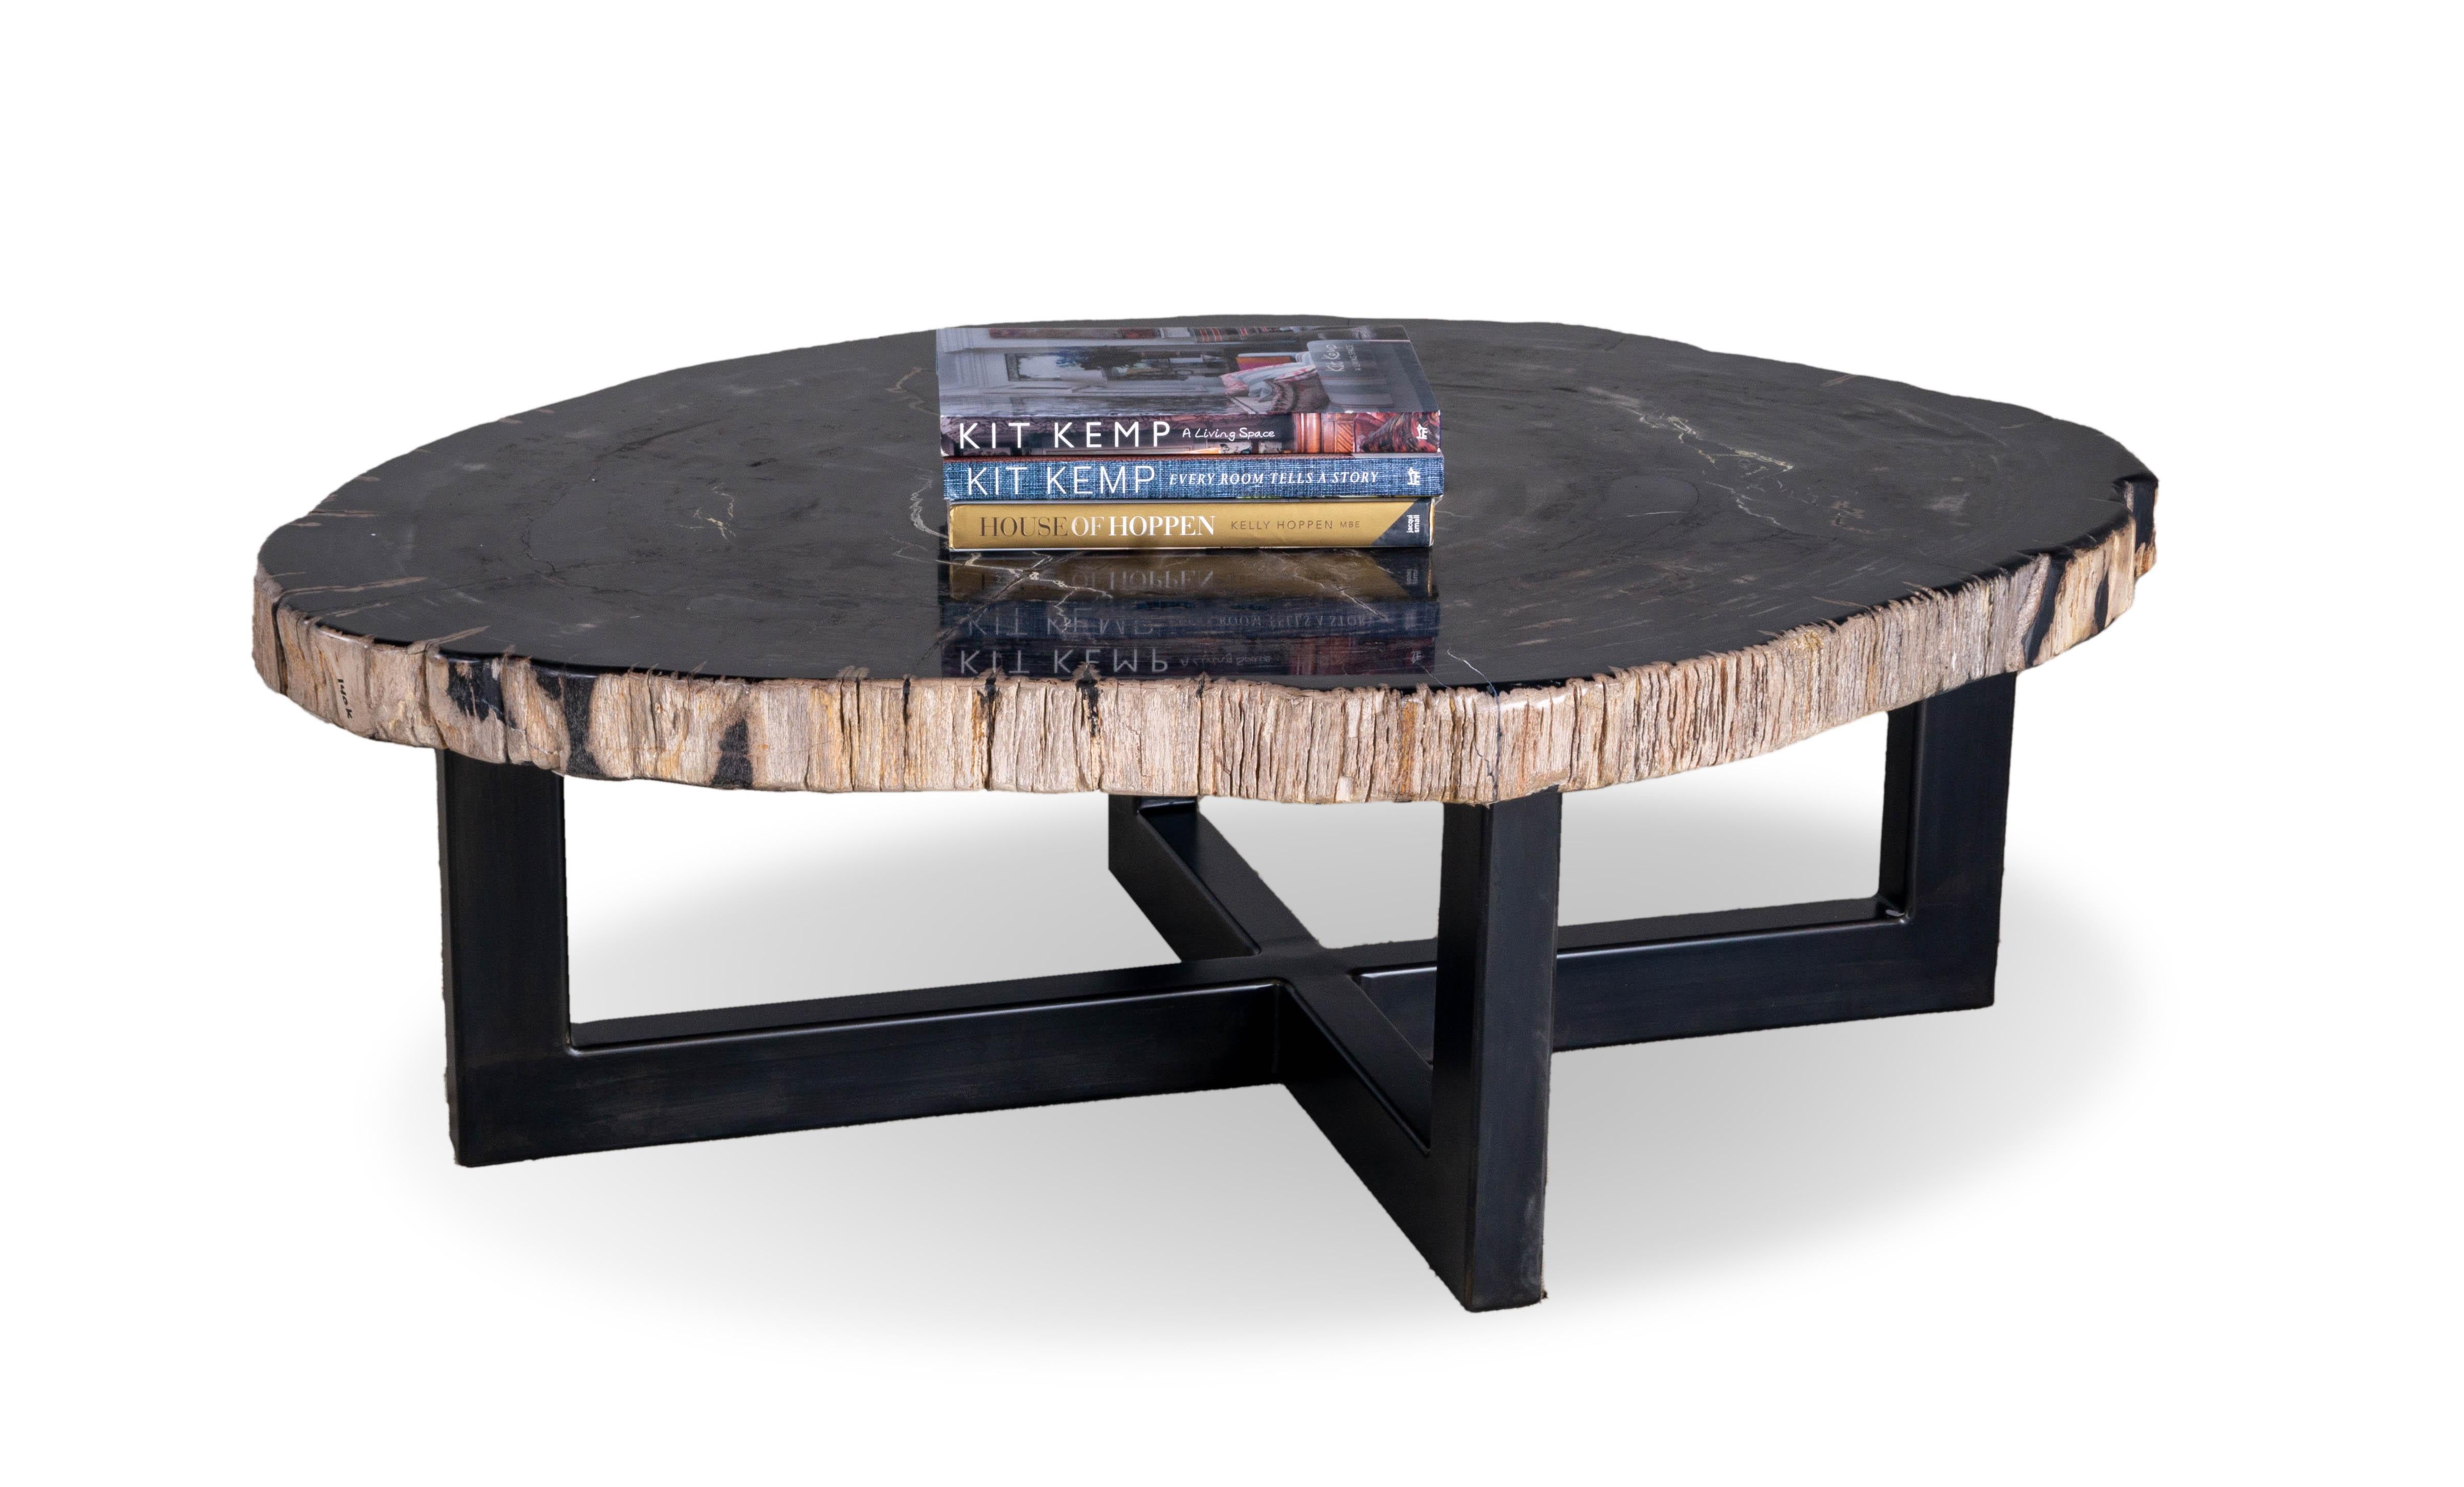 Looking for the perfect piece to make your living room stand out? Introducing this Petrified Wood Coffee Table, the ultimate statement piece that adds an unmistakable touch of modern sophistication and organic style. Crafted with the highest quality